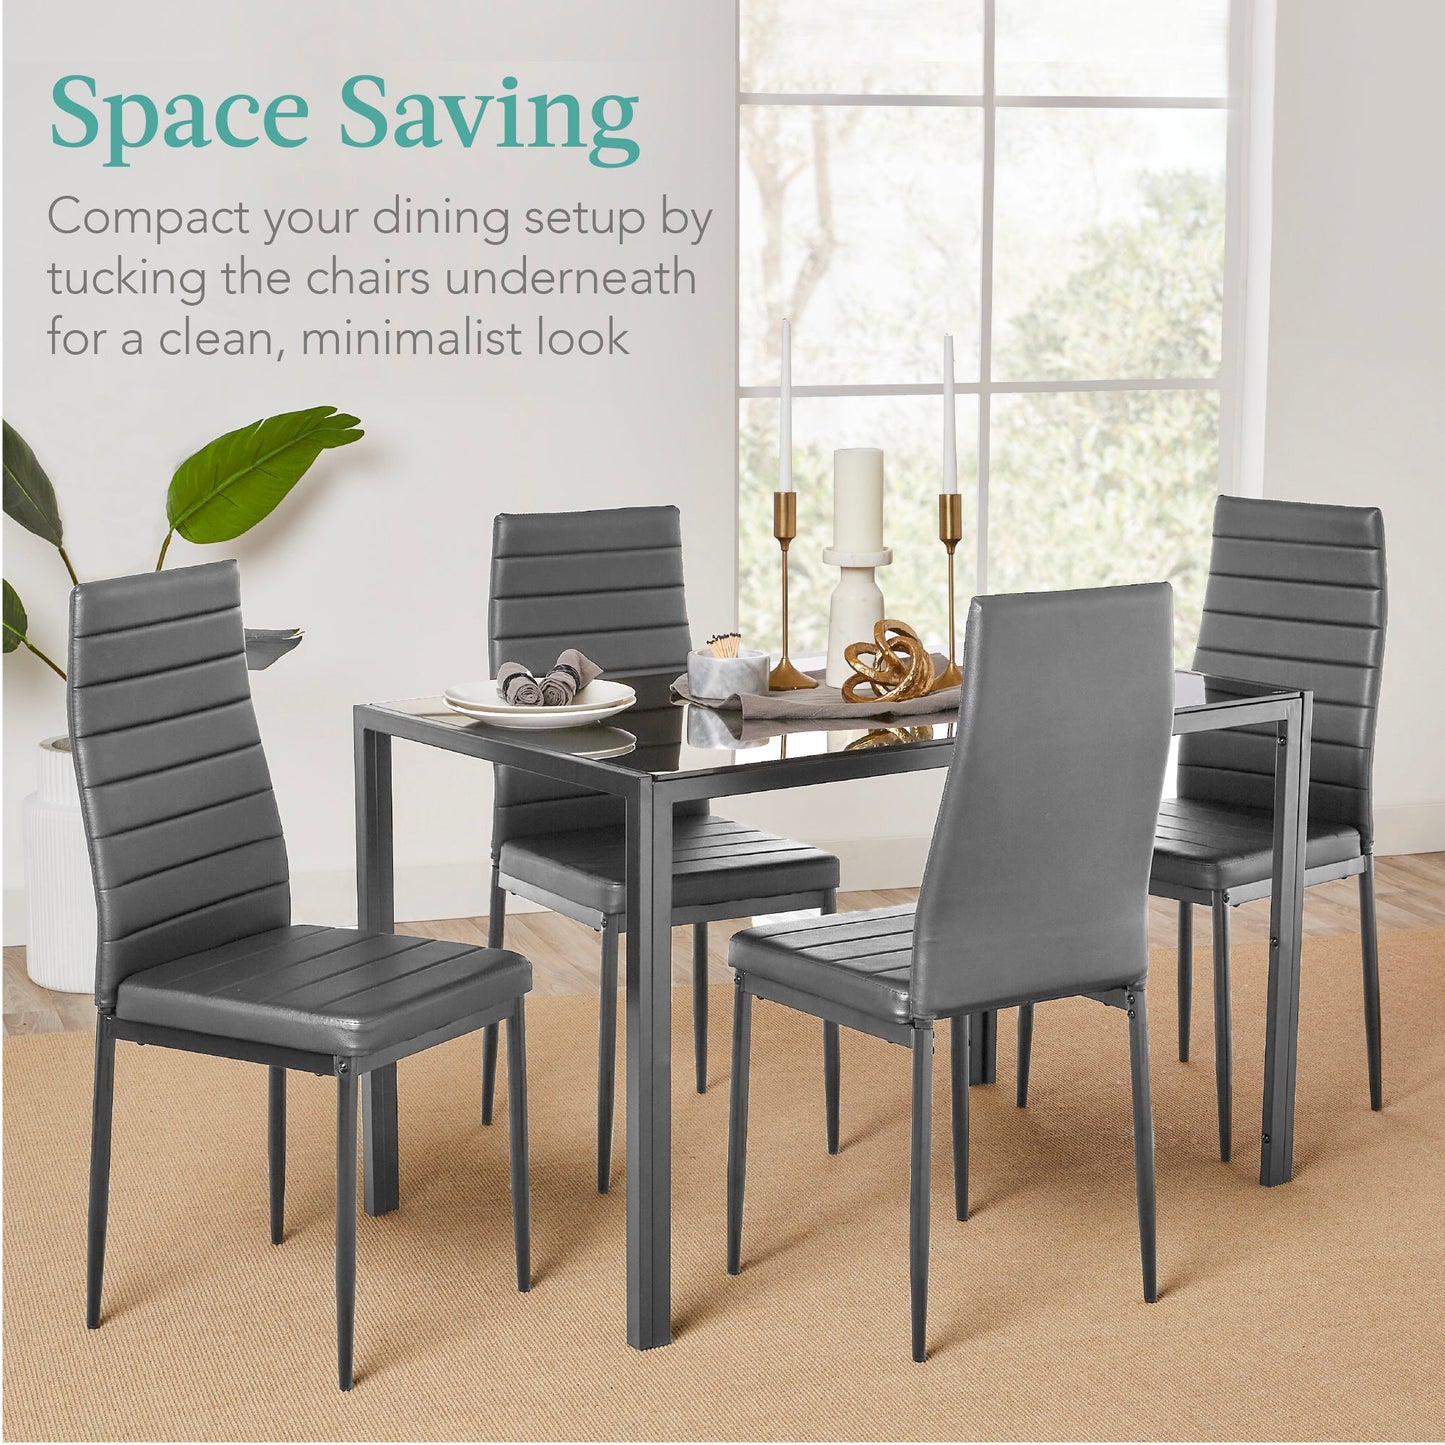 5-Piece Dining Table Set w/ Glass Top, Leather Chairs